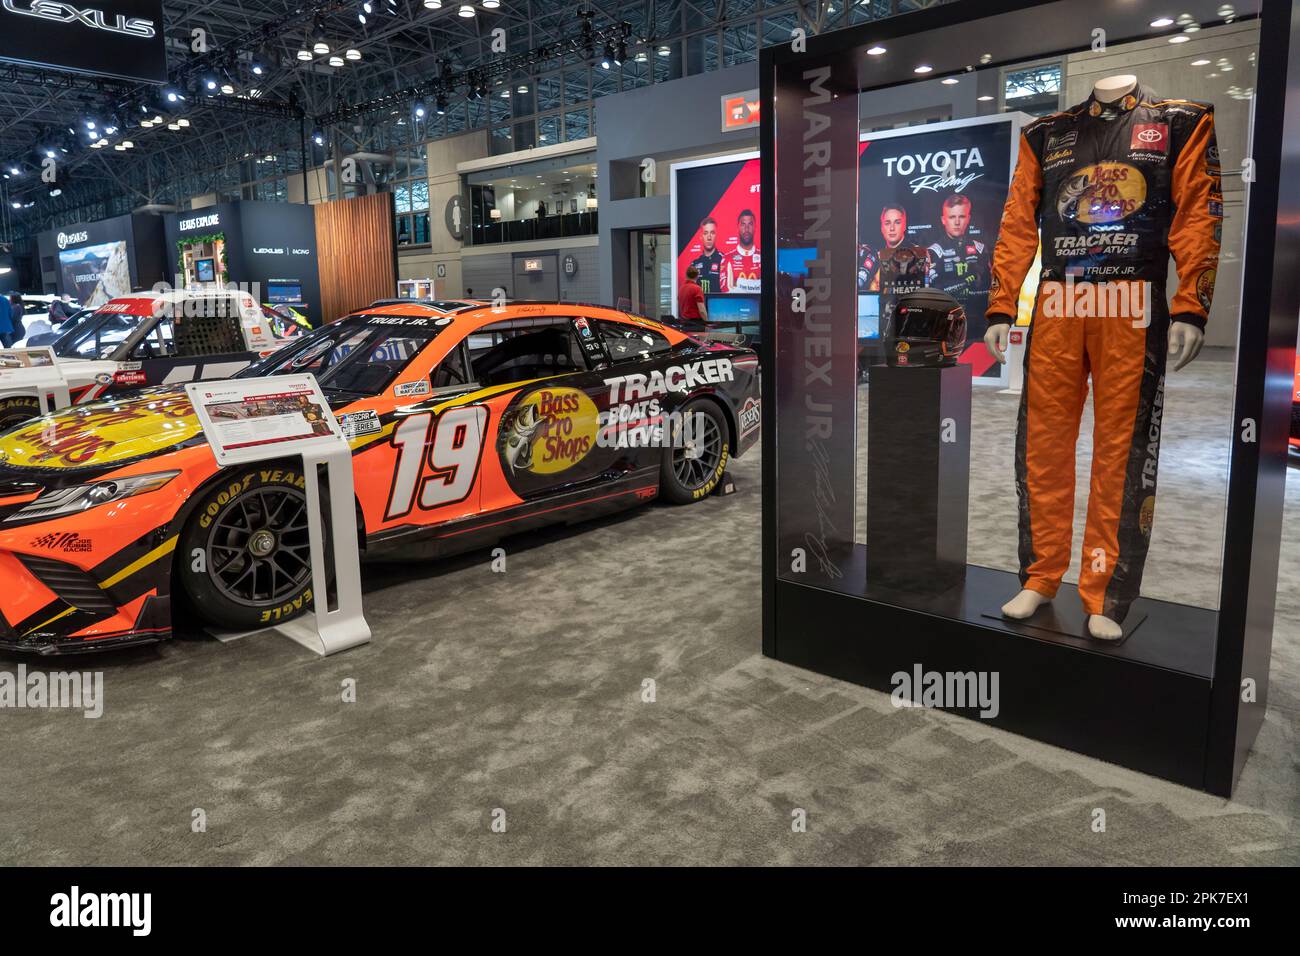 NEW YORK, NEW YORK - APRIL 05: A Joe Gibbs Racing #19 Camry Cup Car driven by Martin Truex Jr. seen at the International Auto Show press preview at the Jacob Javits Convention Center on April 5, 2023 in New York City. Stock Photo